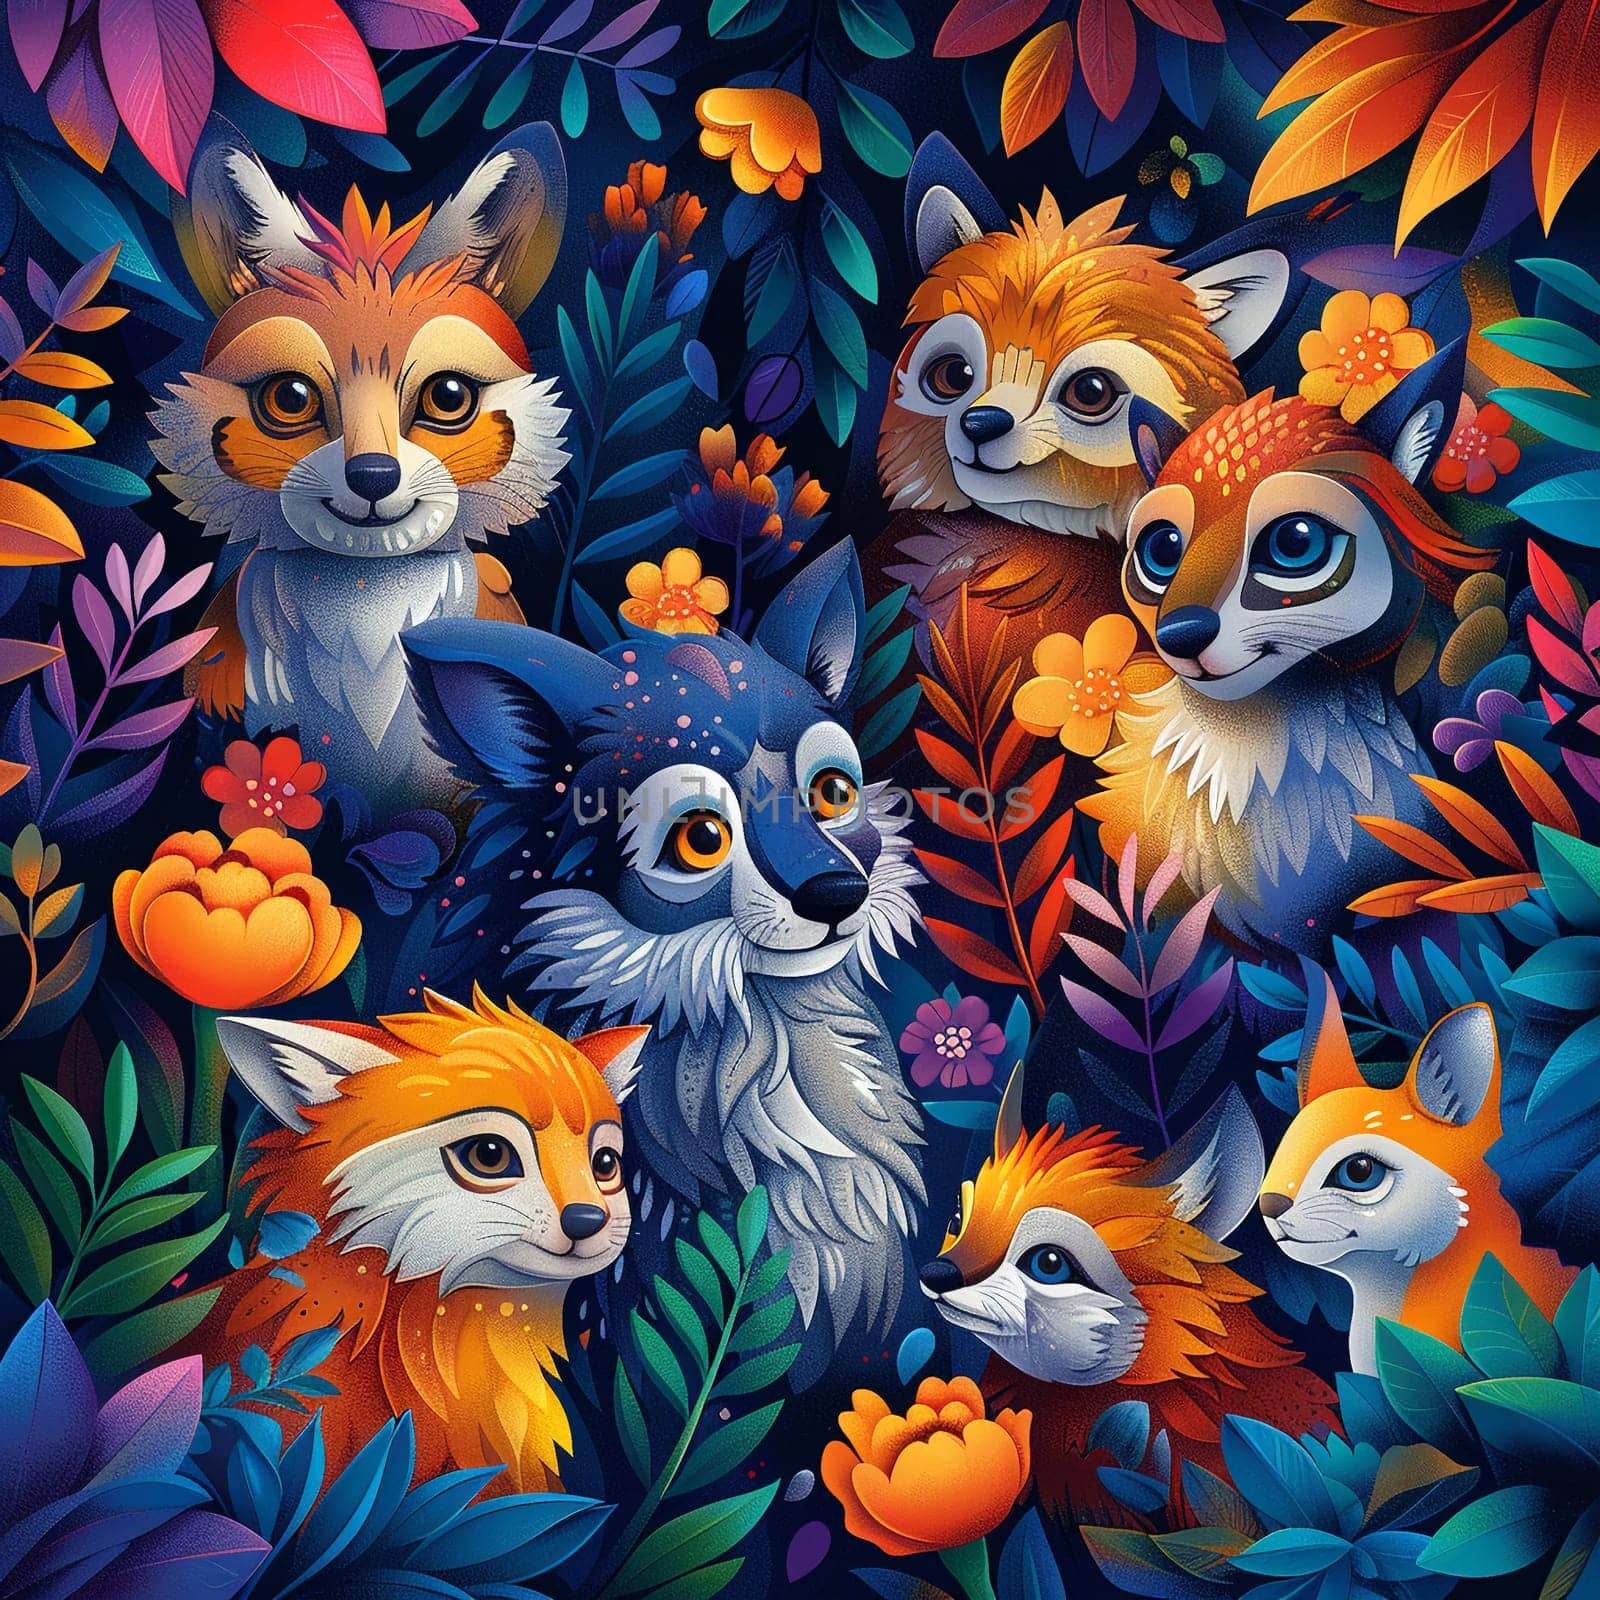 Abstract illustration of animals coming together in colorful forest by Benzoix